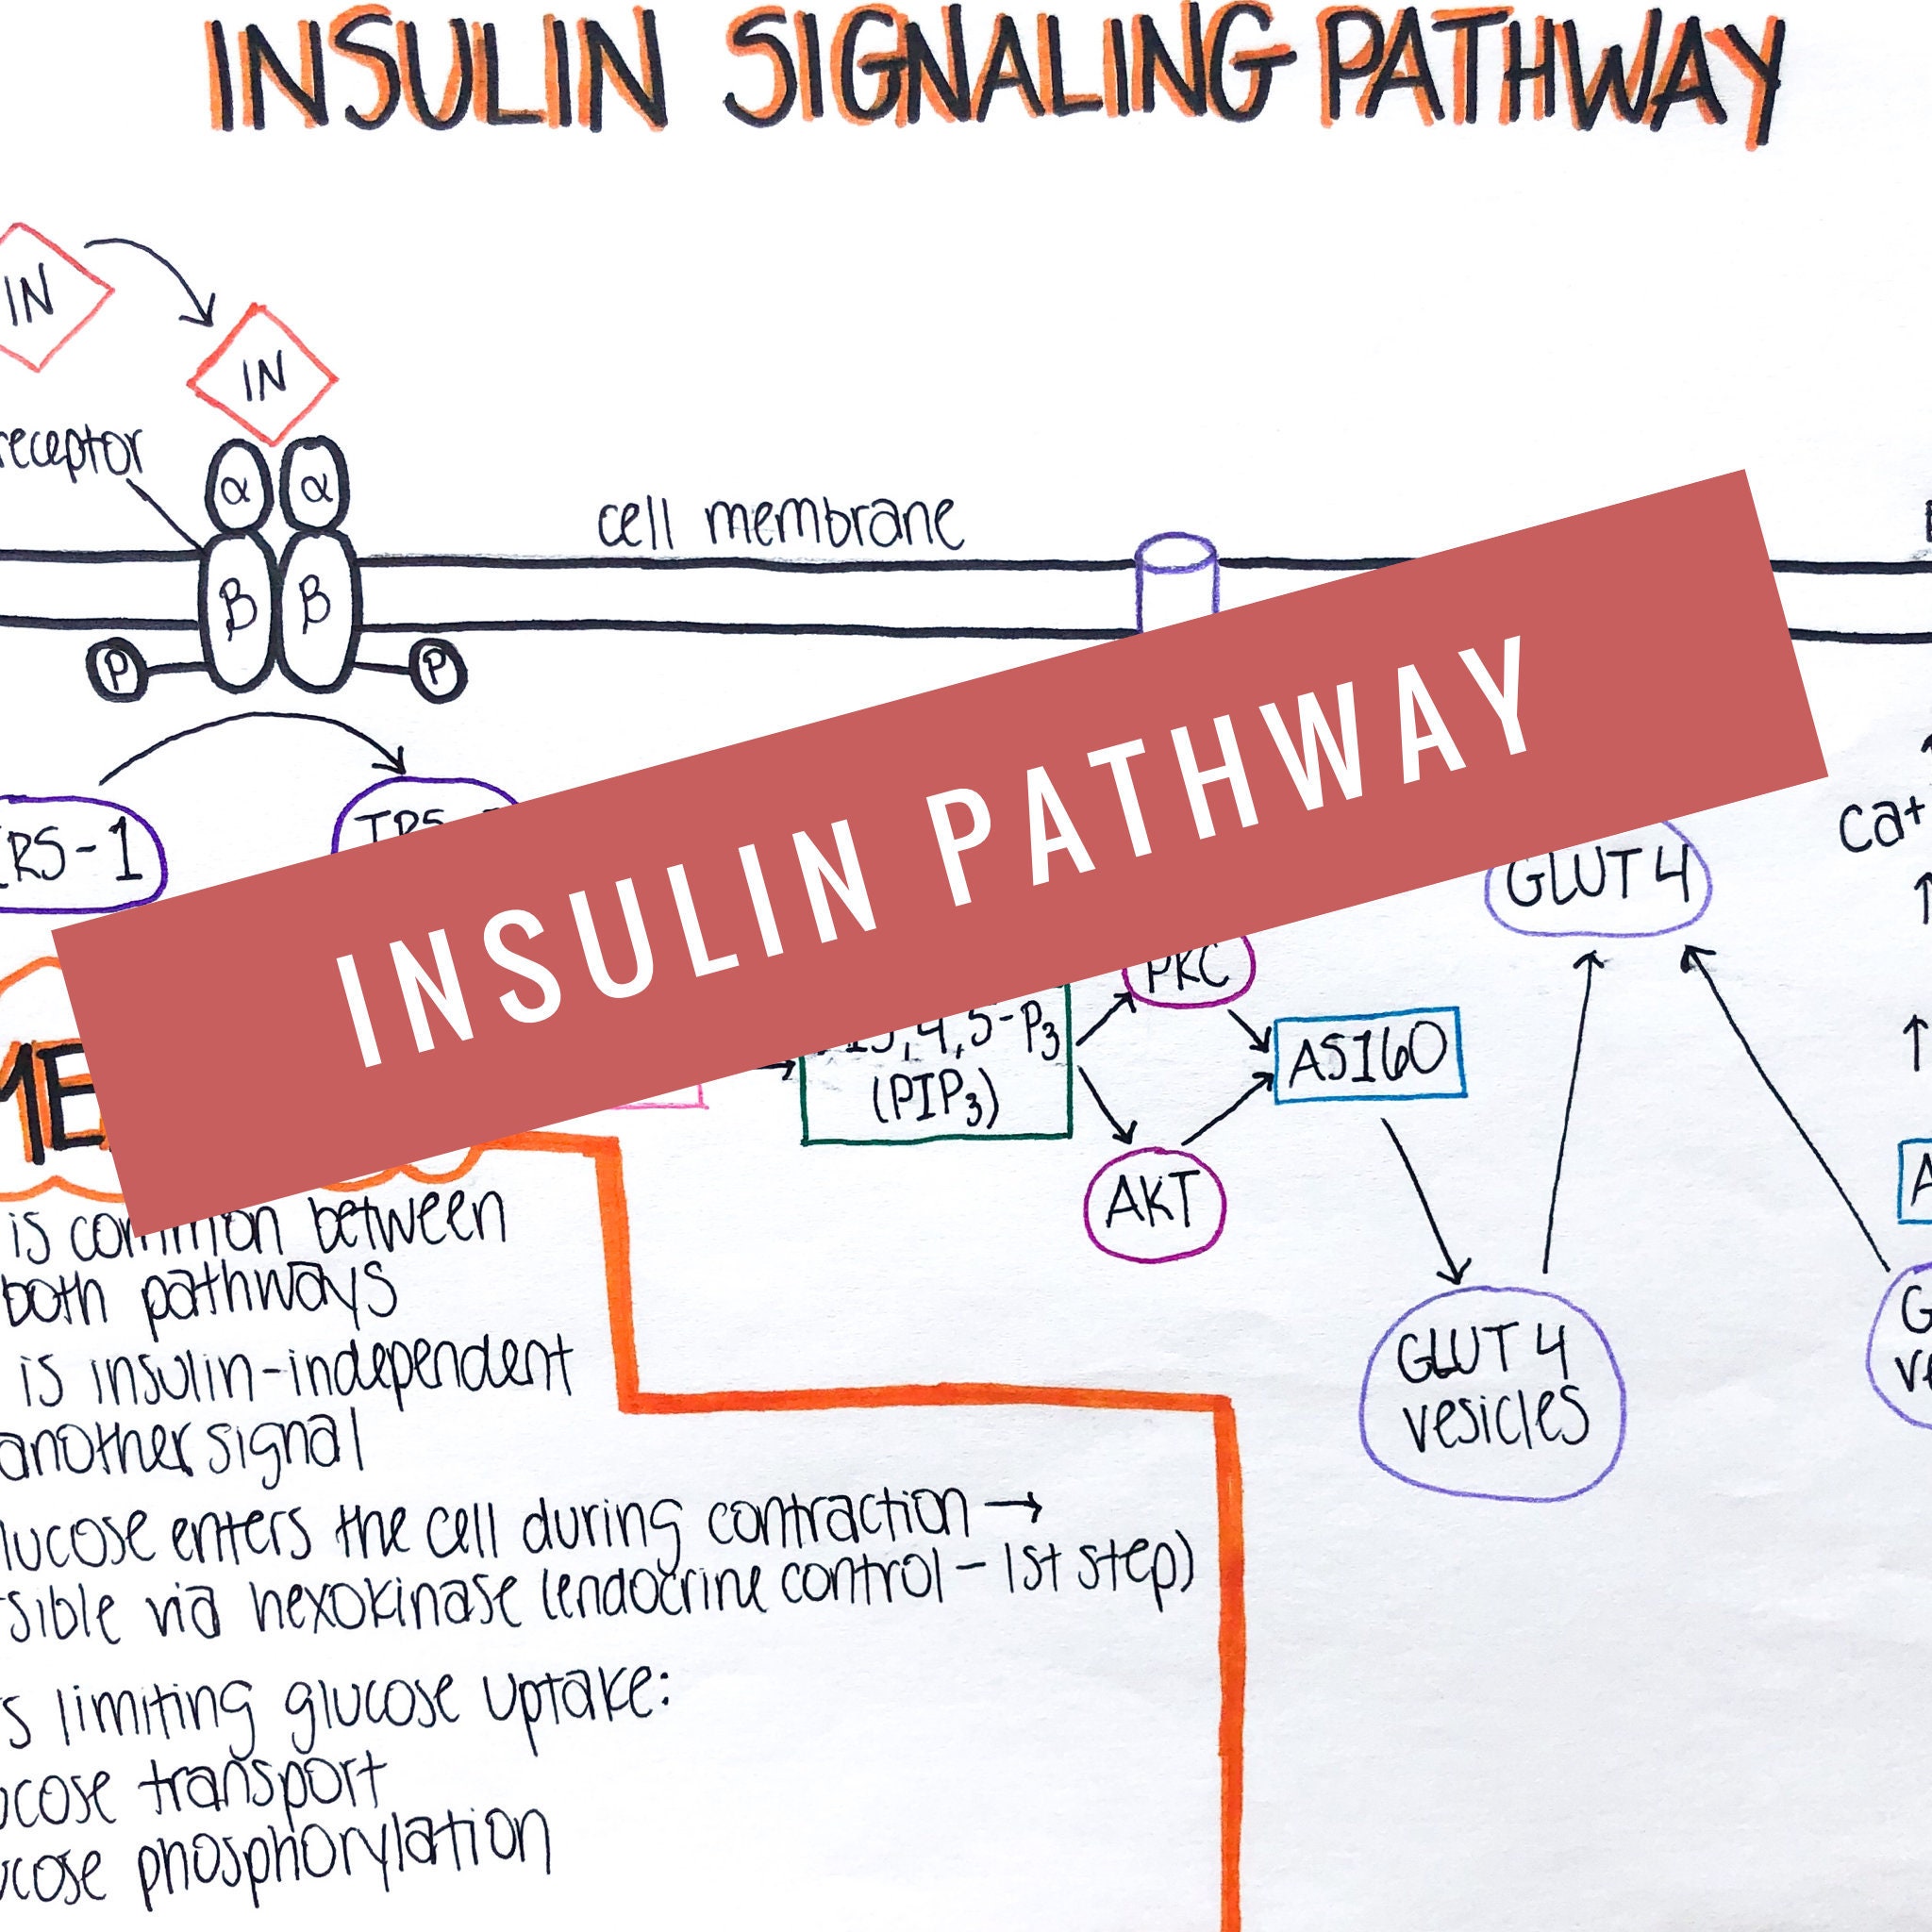 diabetes and insulin signaling case study quizlet